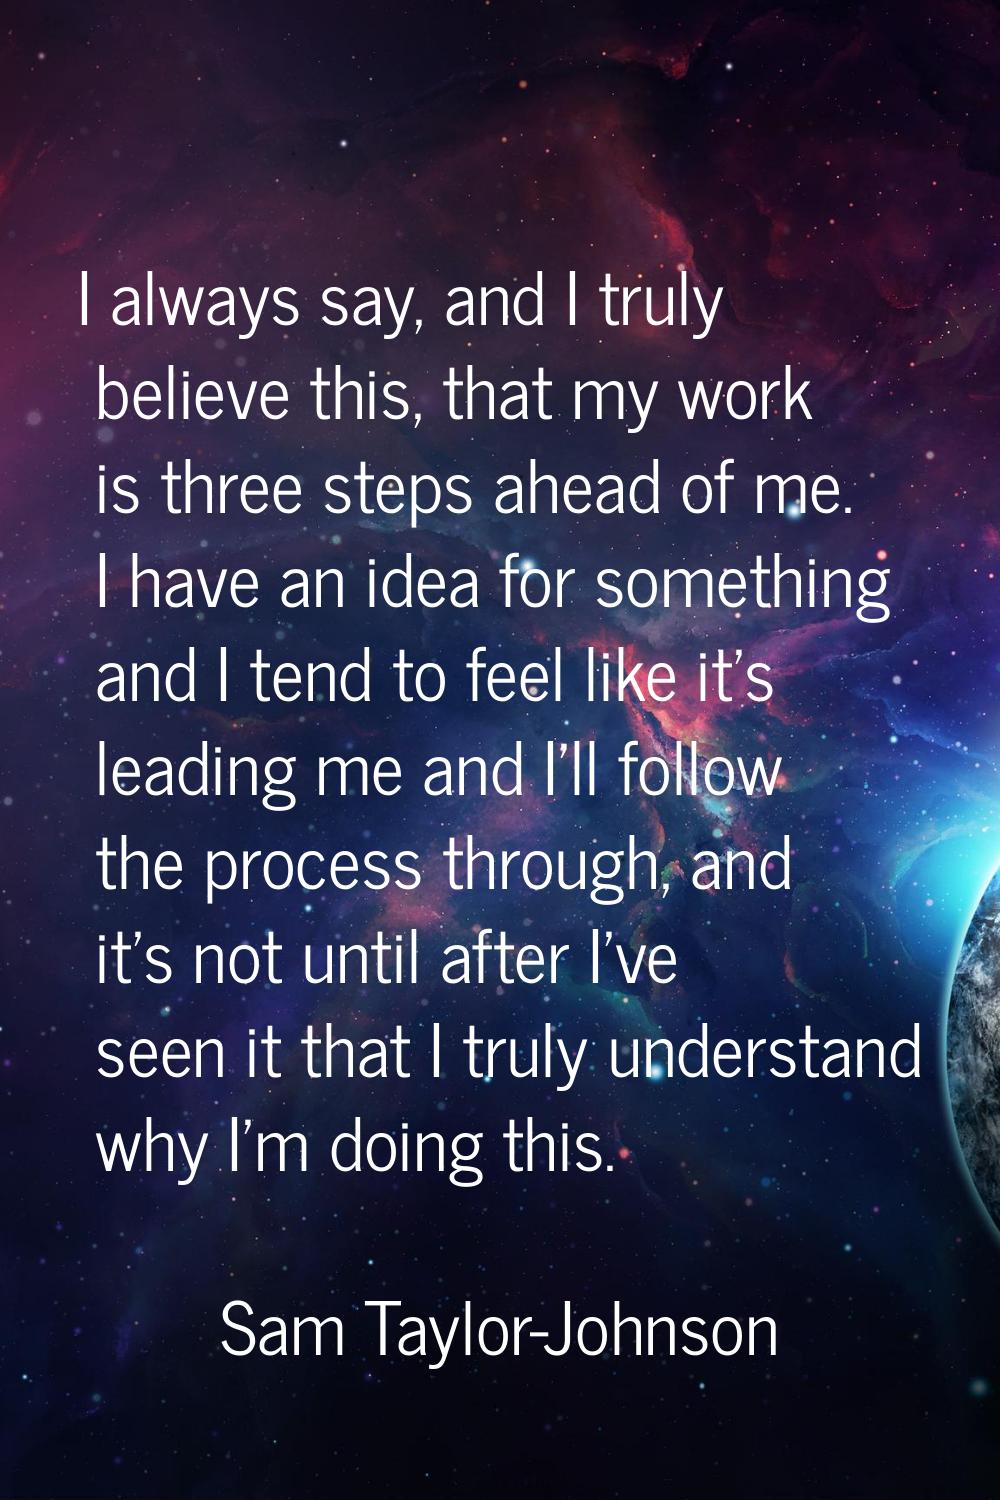 I always say, and I truly believe this, that my work is three steps ahead of me. I have an idea for